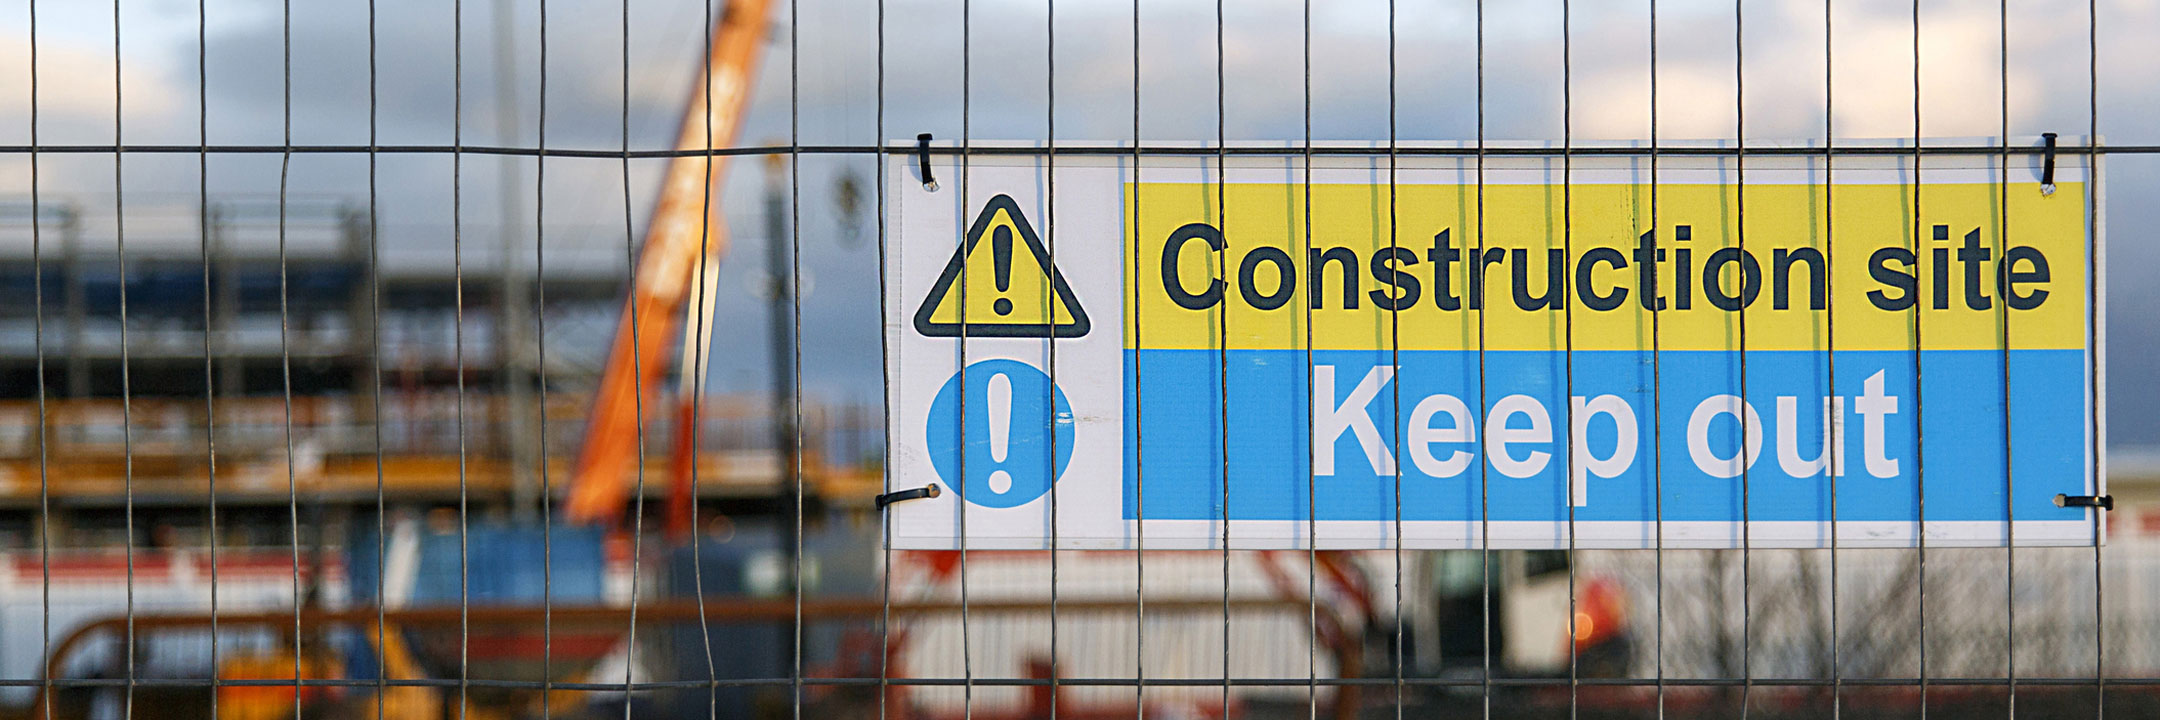 Warning sign on a fence at a construction site reads 'Construction site Keep out' with a caution symbol